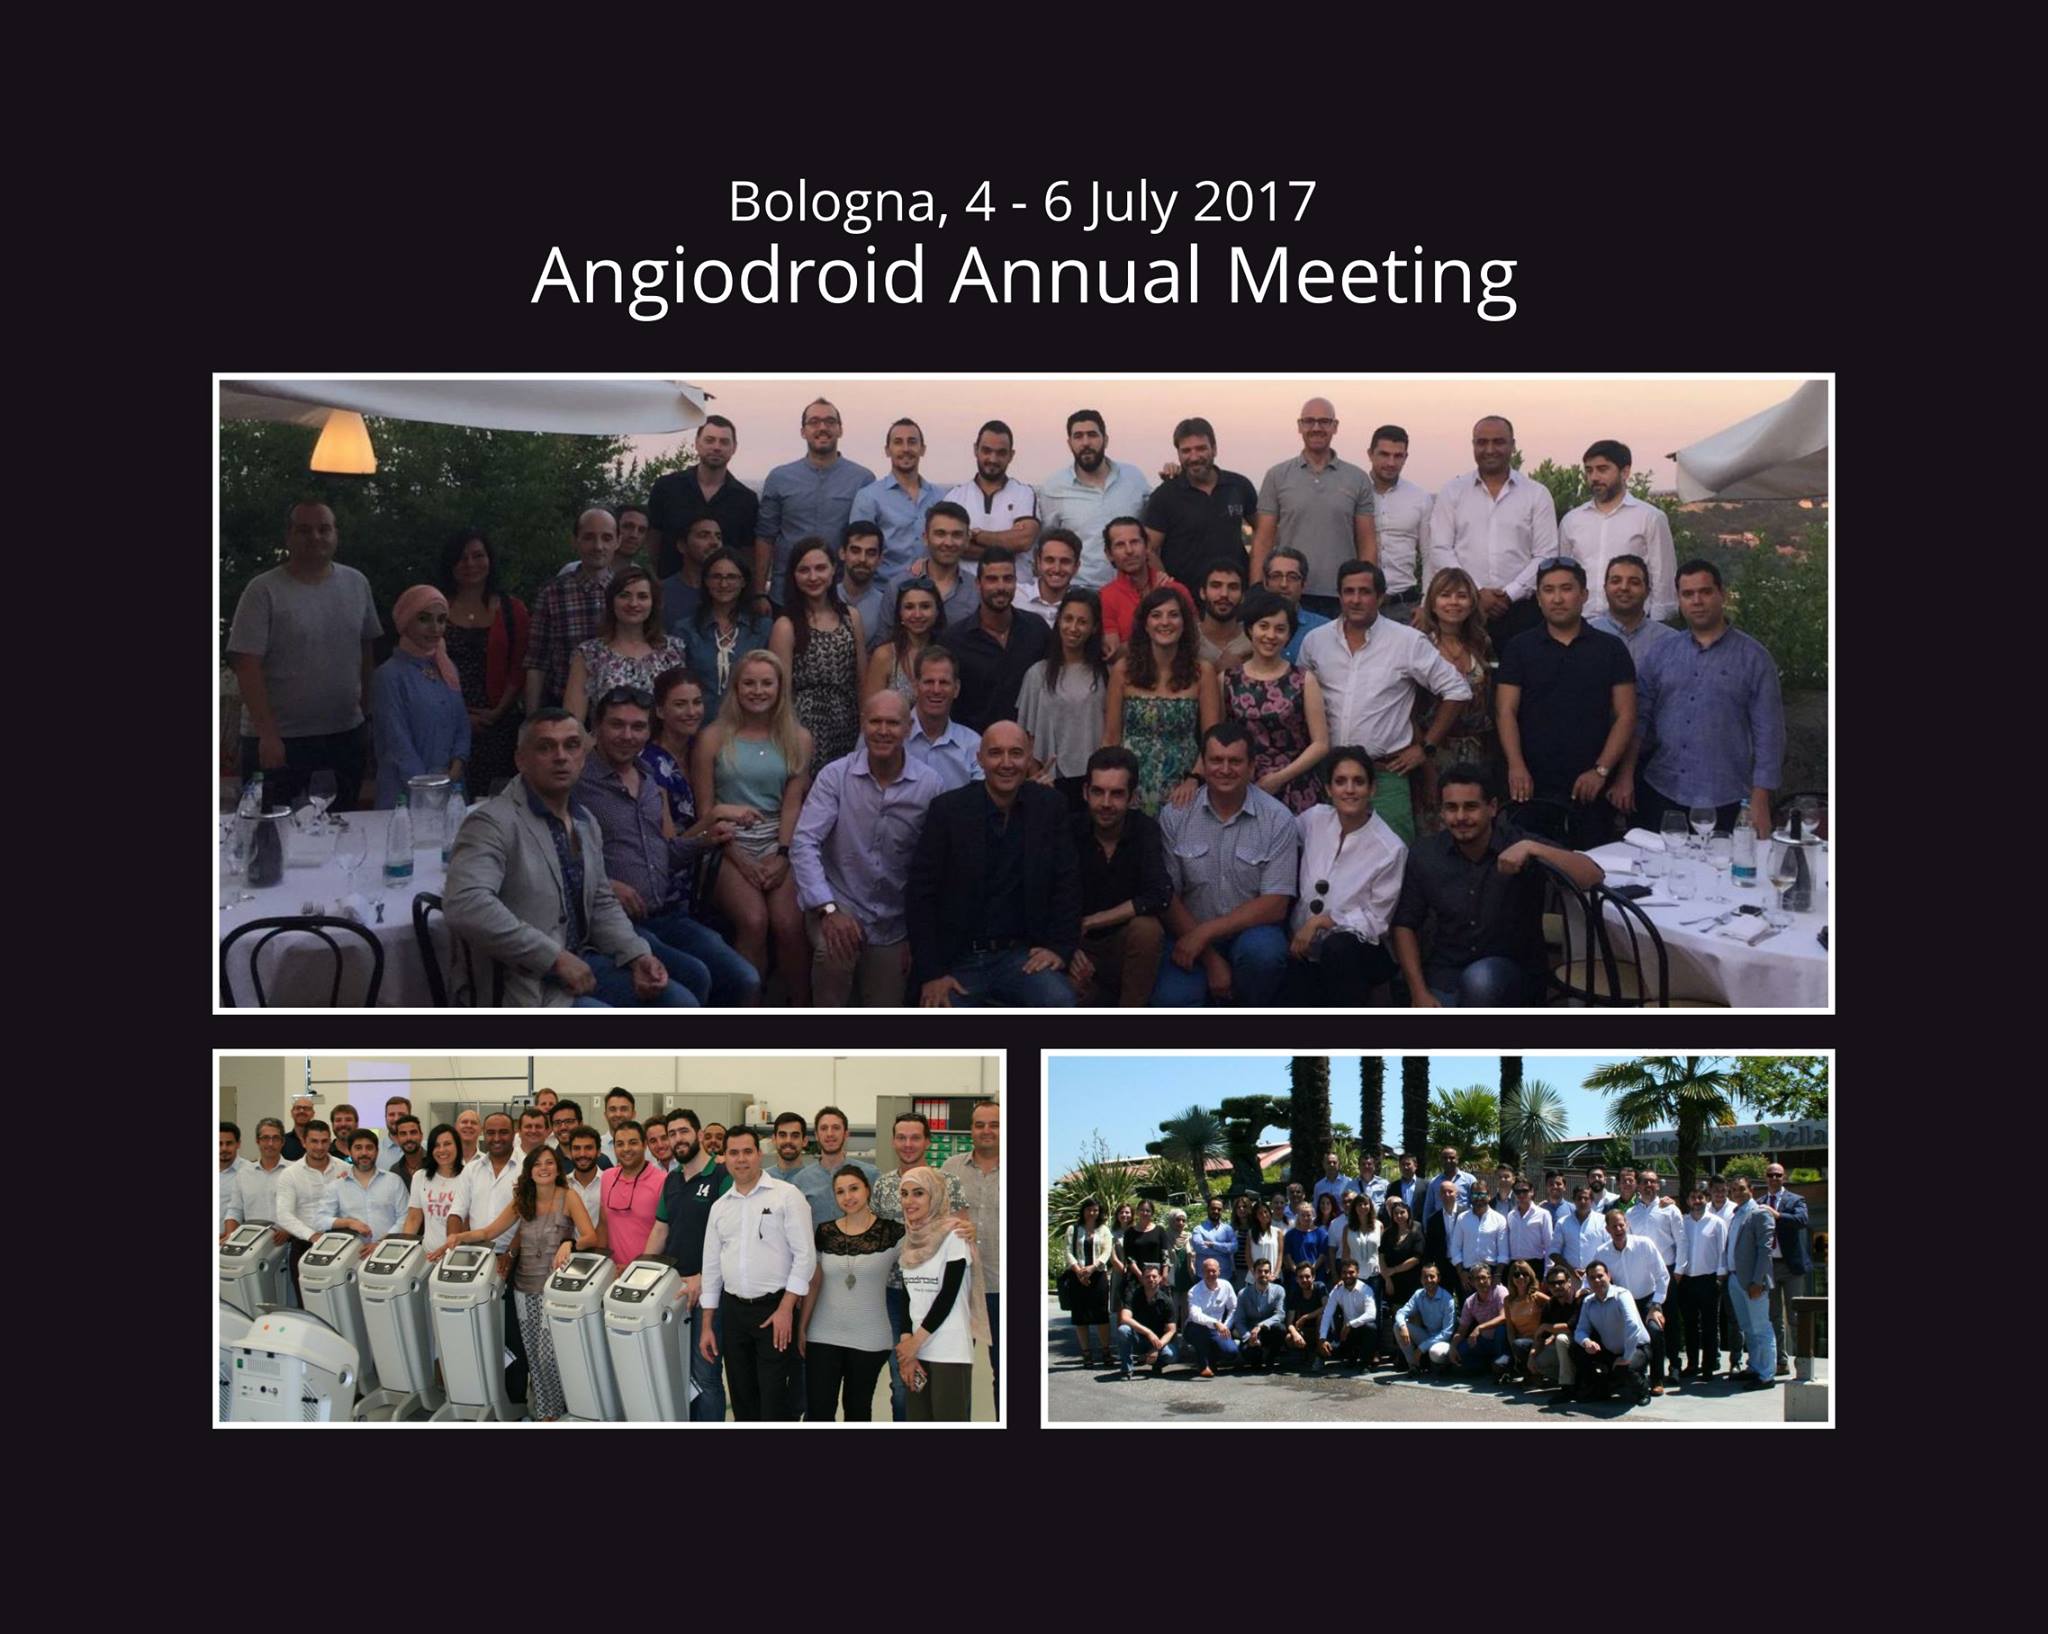 2nd Annual Meeting- Bologna, July 4 – 6, 2017: